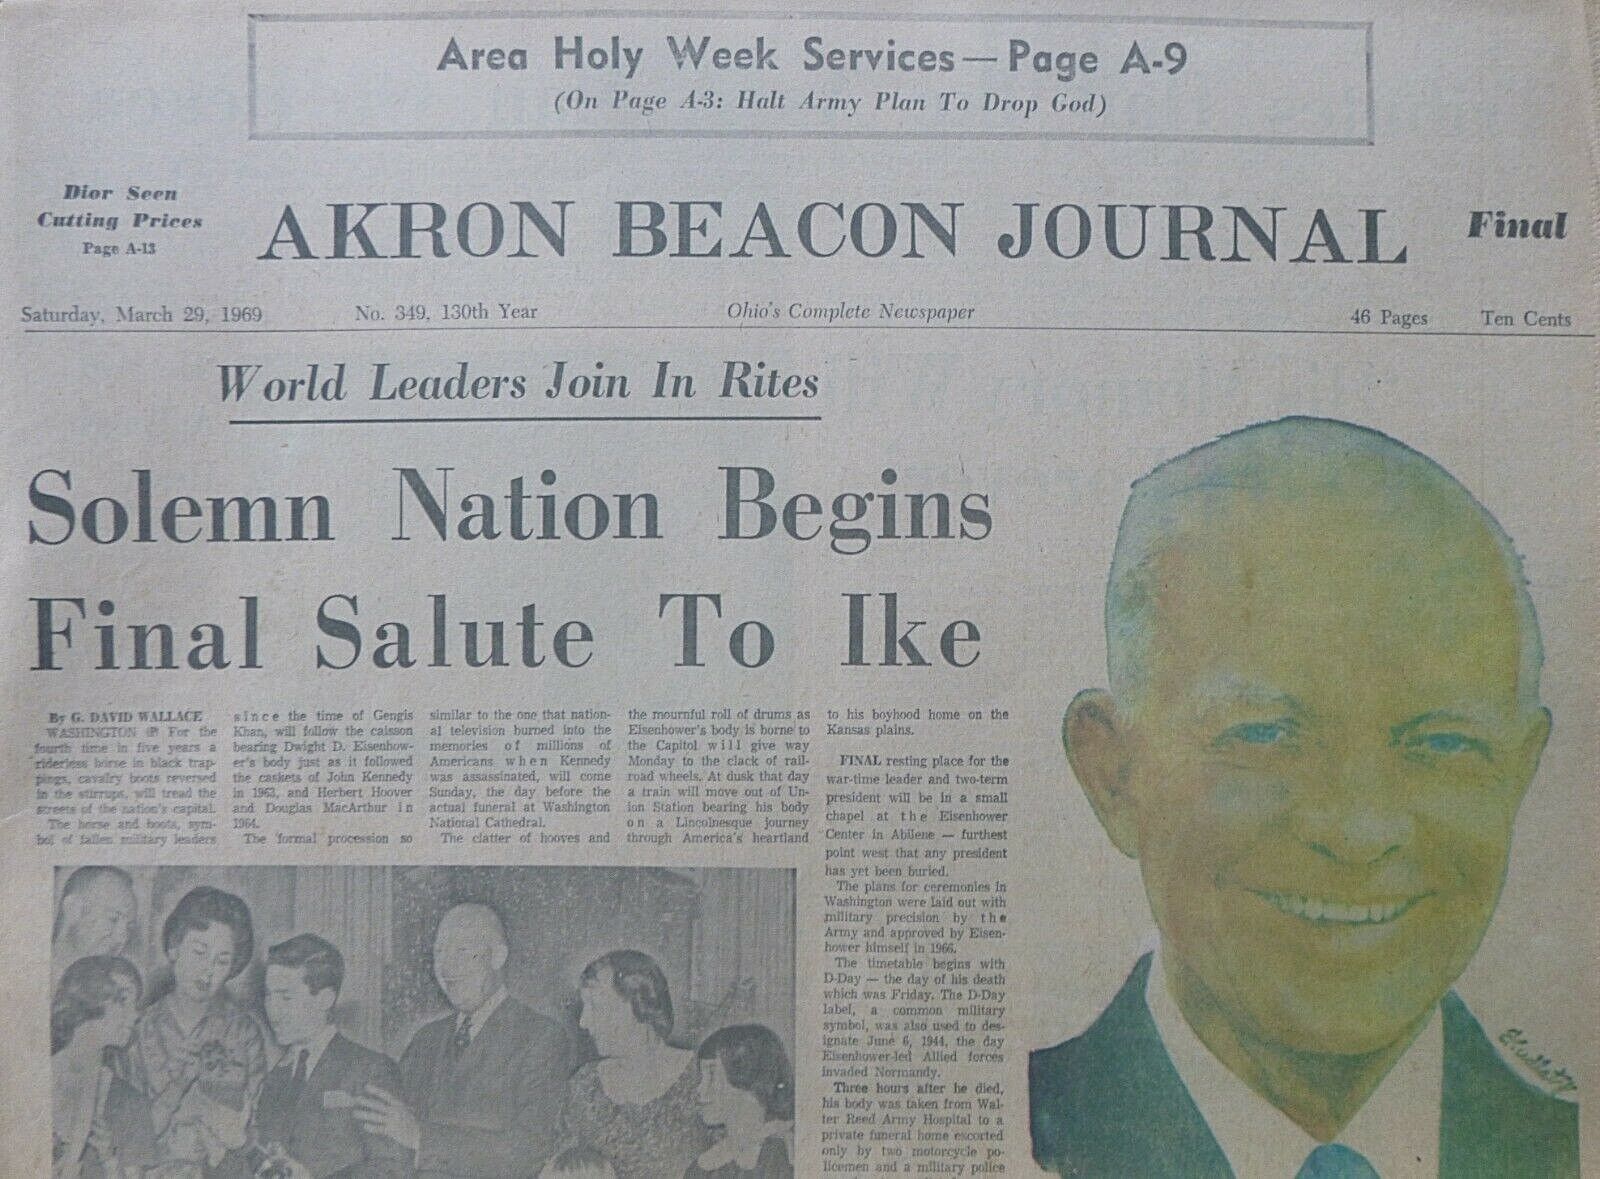 DWIGHT EISENHOWER RITES SOLEMN NATION BEGINS FINAL SALUTE TO IKE March 29 1969 